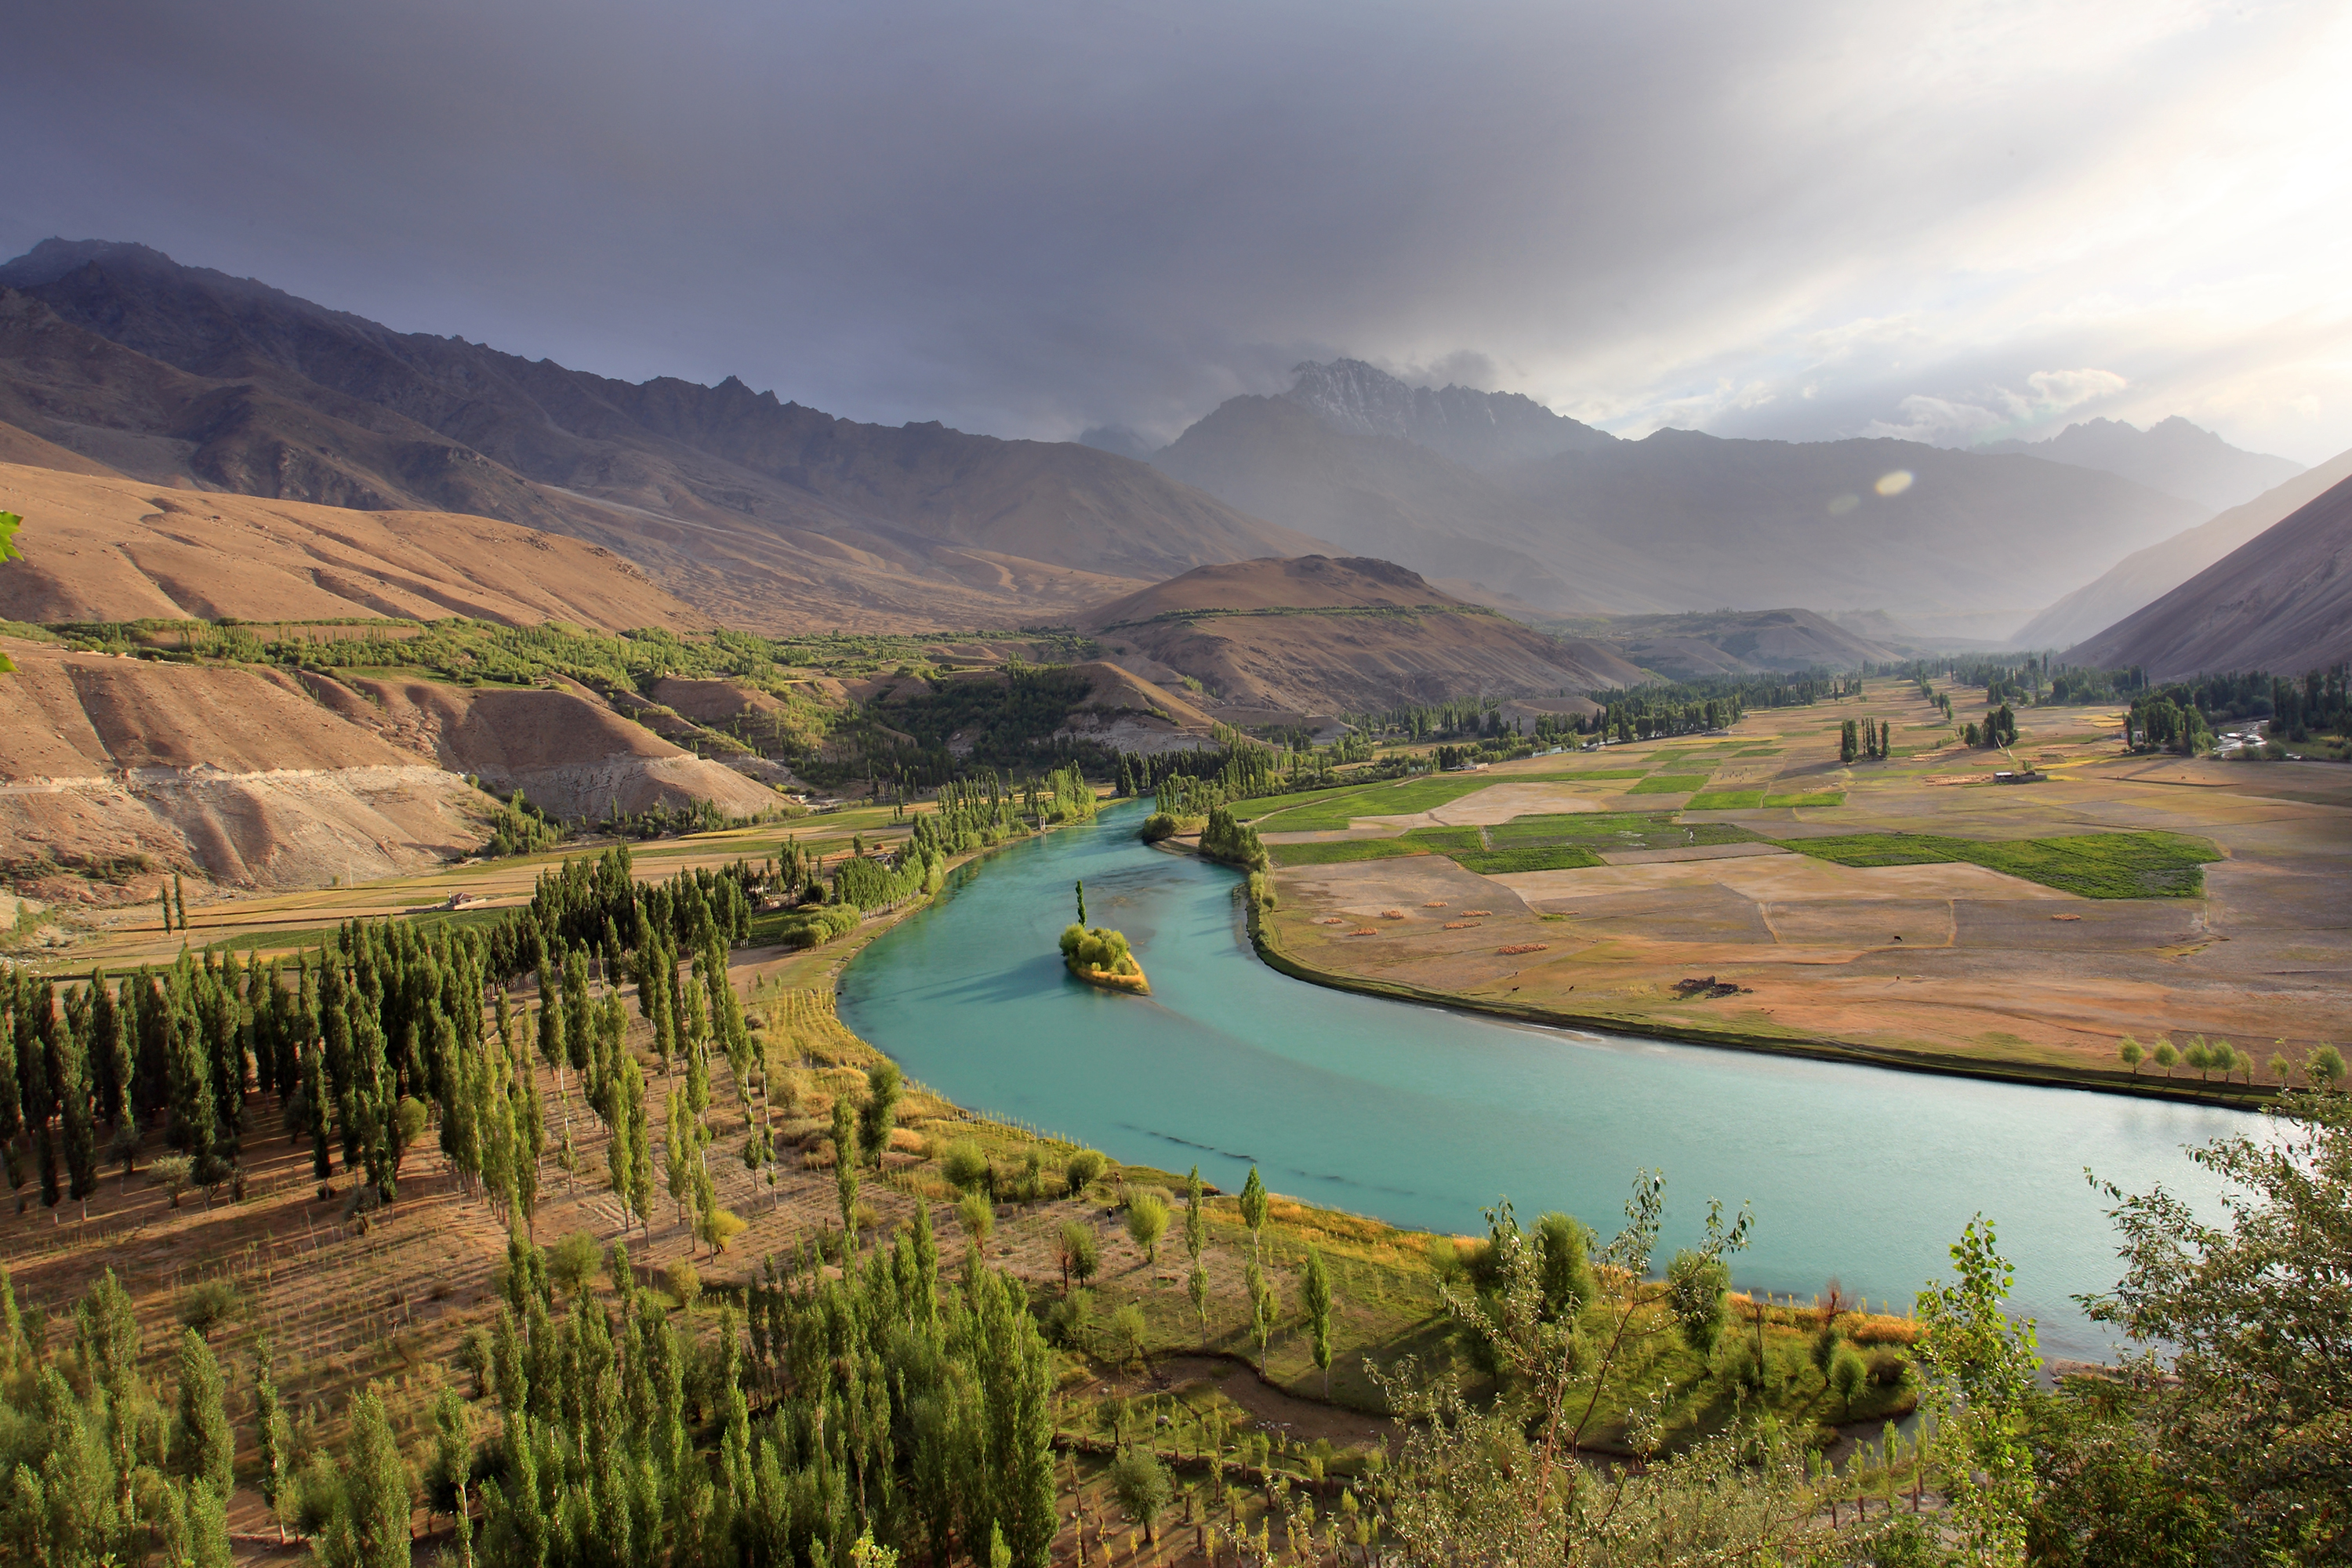 The turquoise Phandar river snakes through the valley 